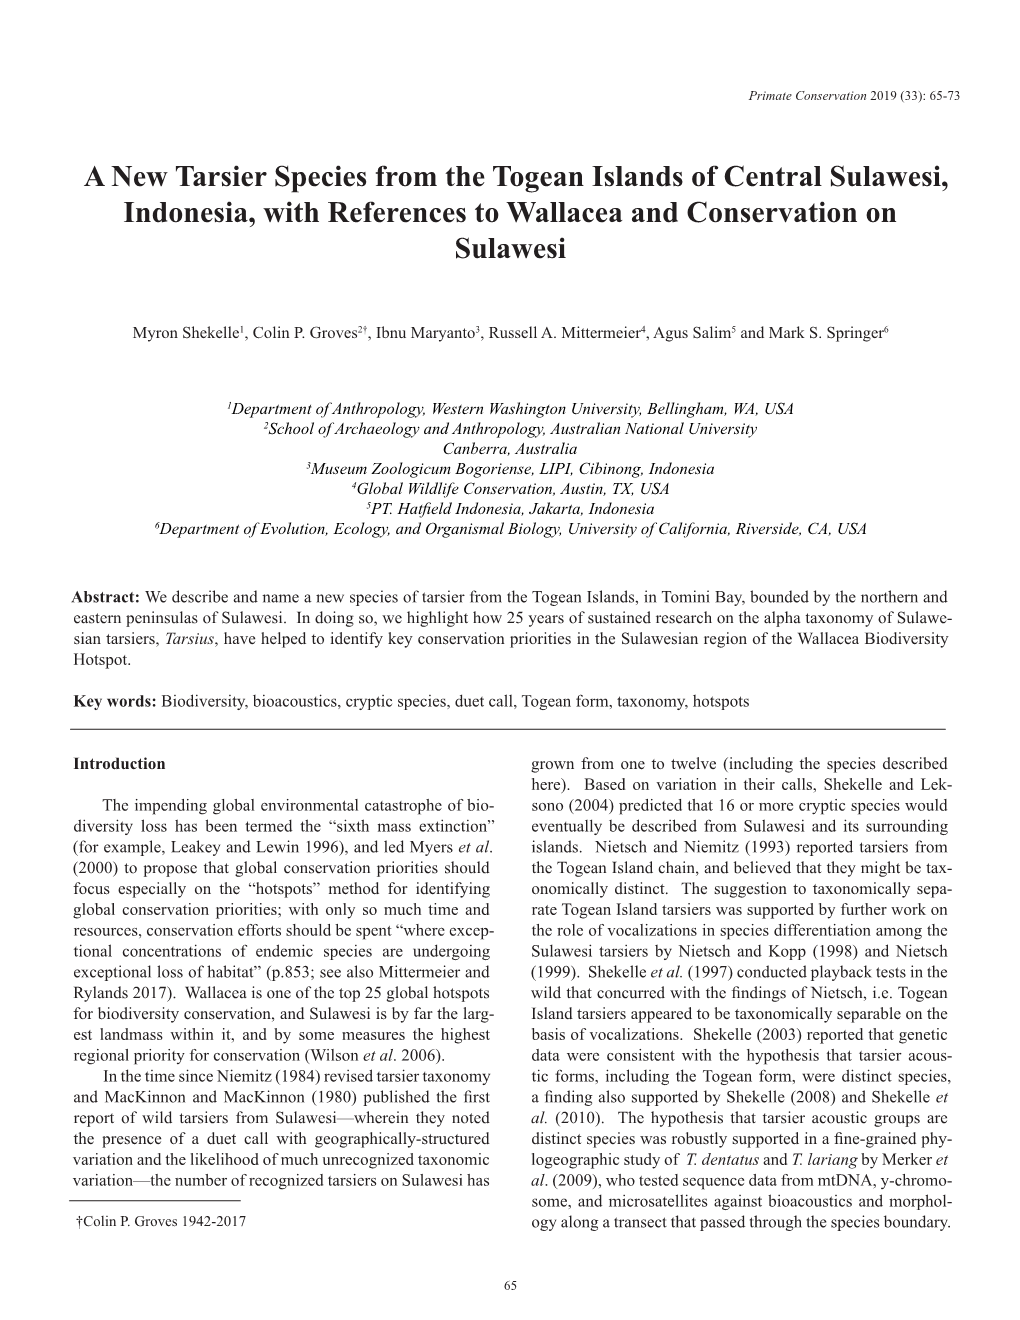 A New Tarsier Species from the Togean Islands of Central Sulawesi, Indonesia, with References to Wallacea and Conservation on Sulawesi